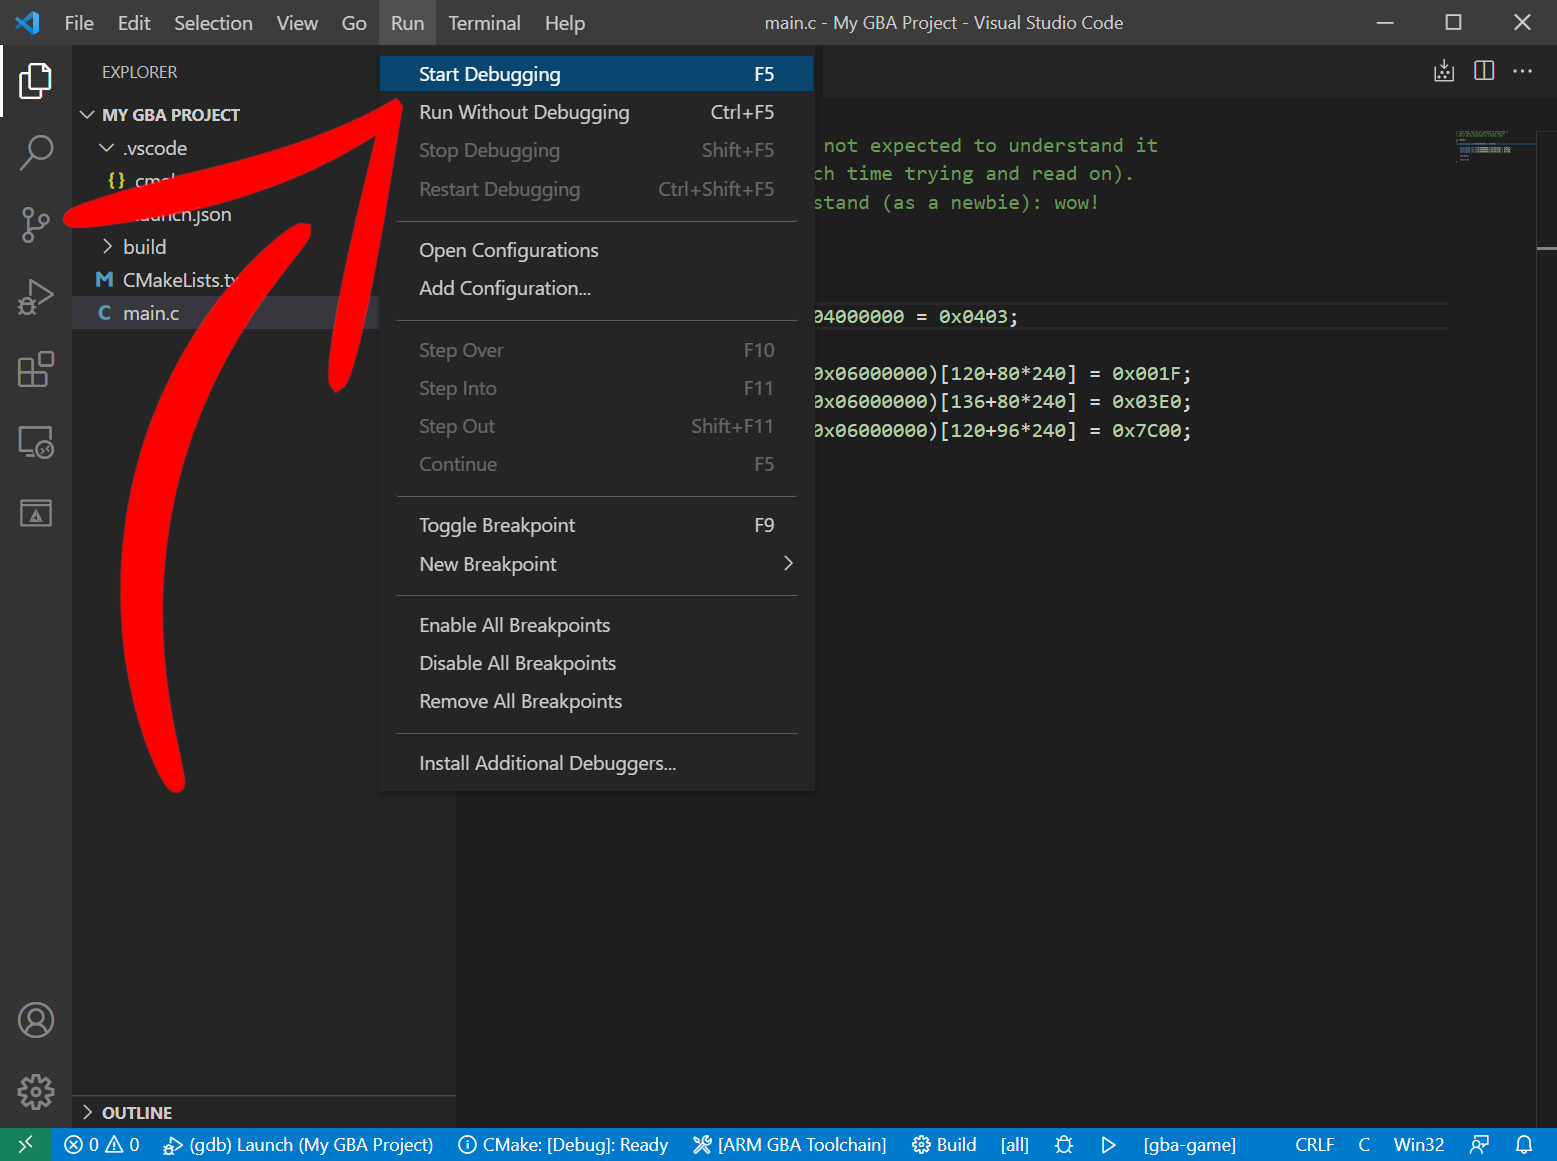 VSCode with the Start Debugging option